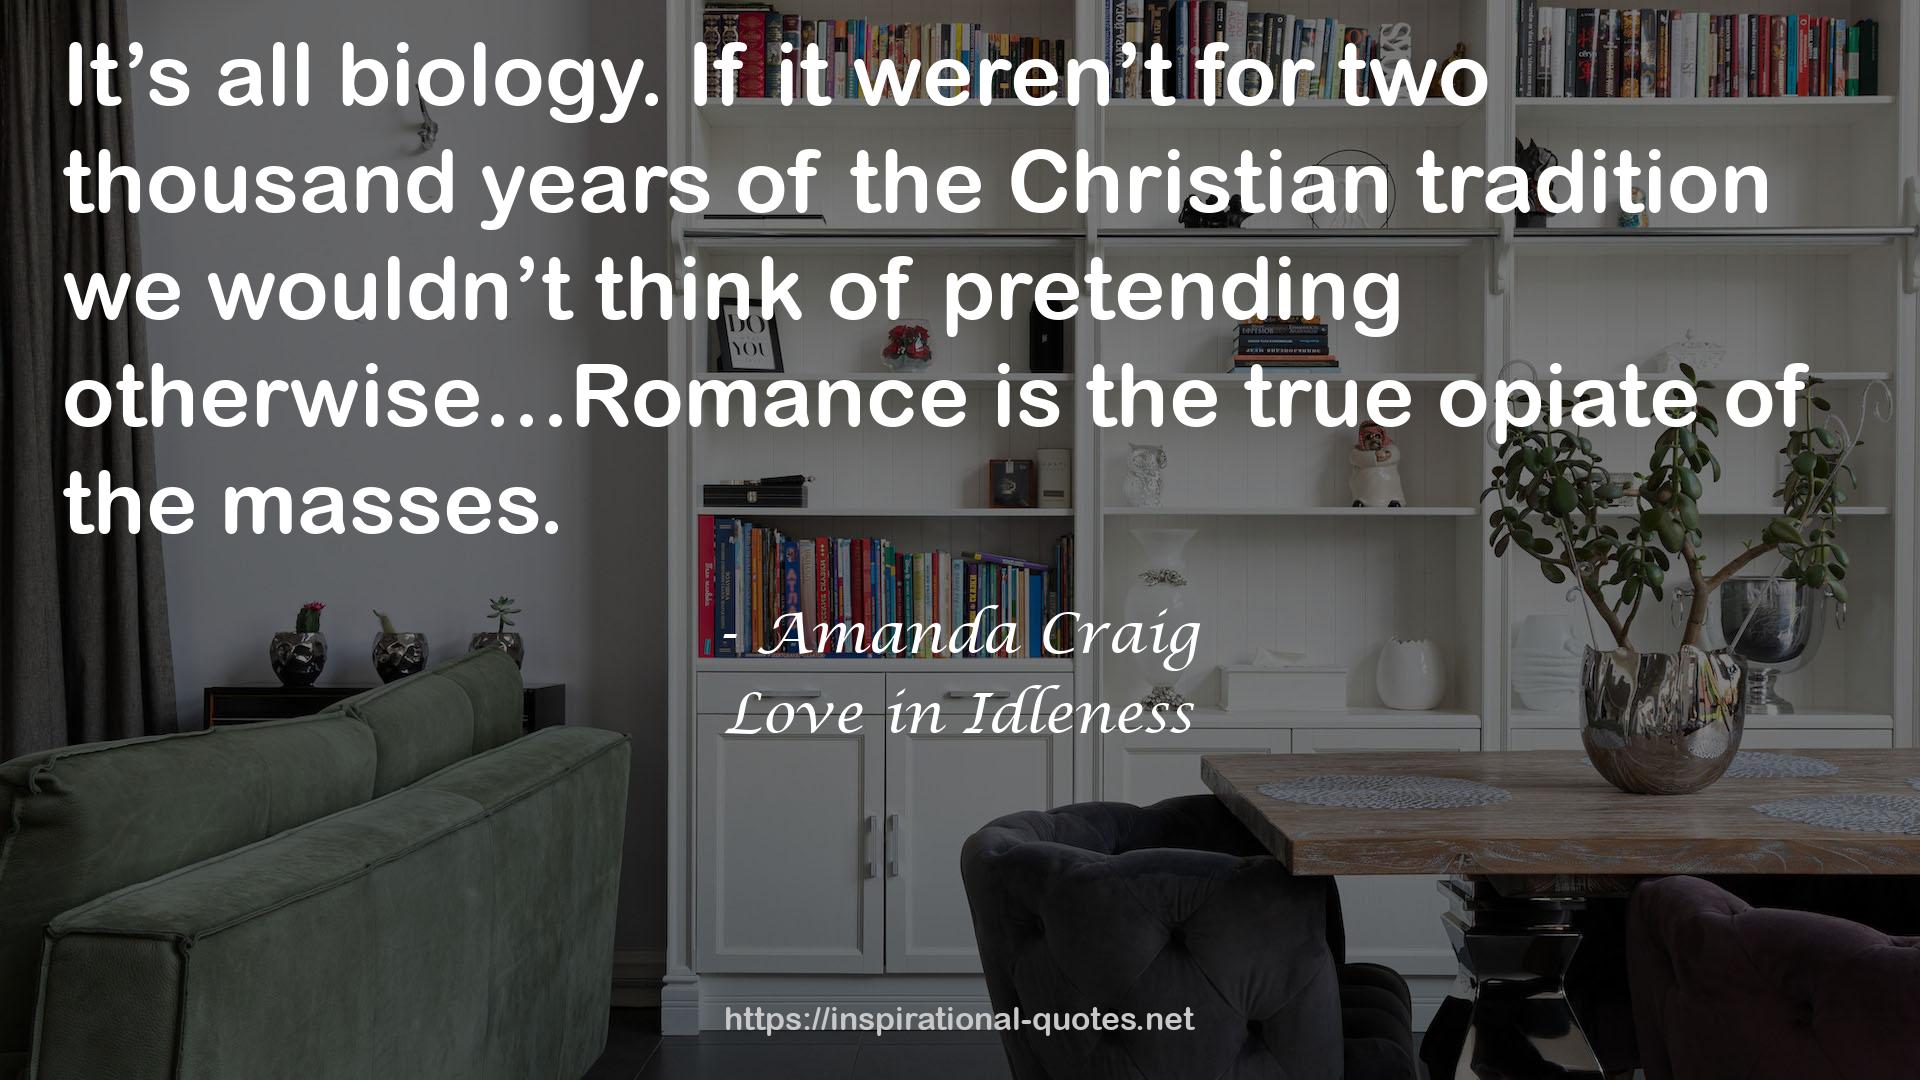 the Christian tradition  QUOTES